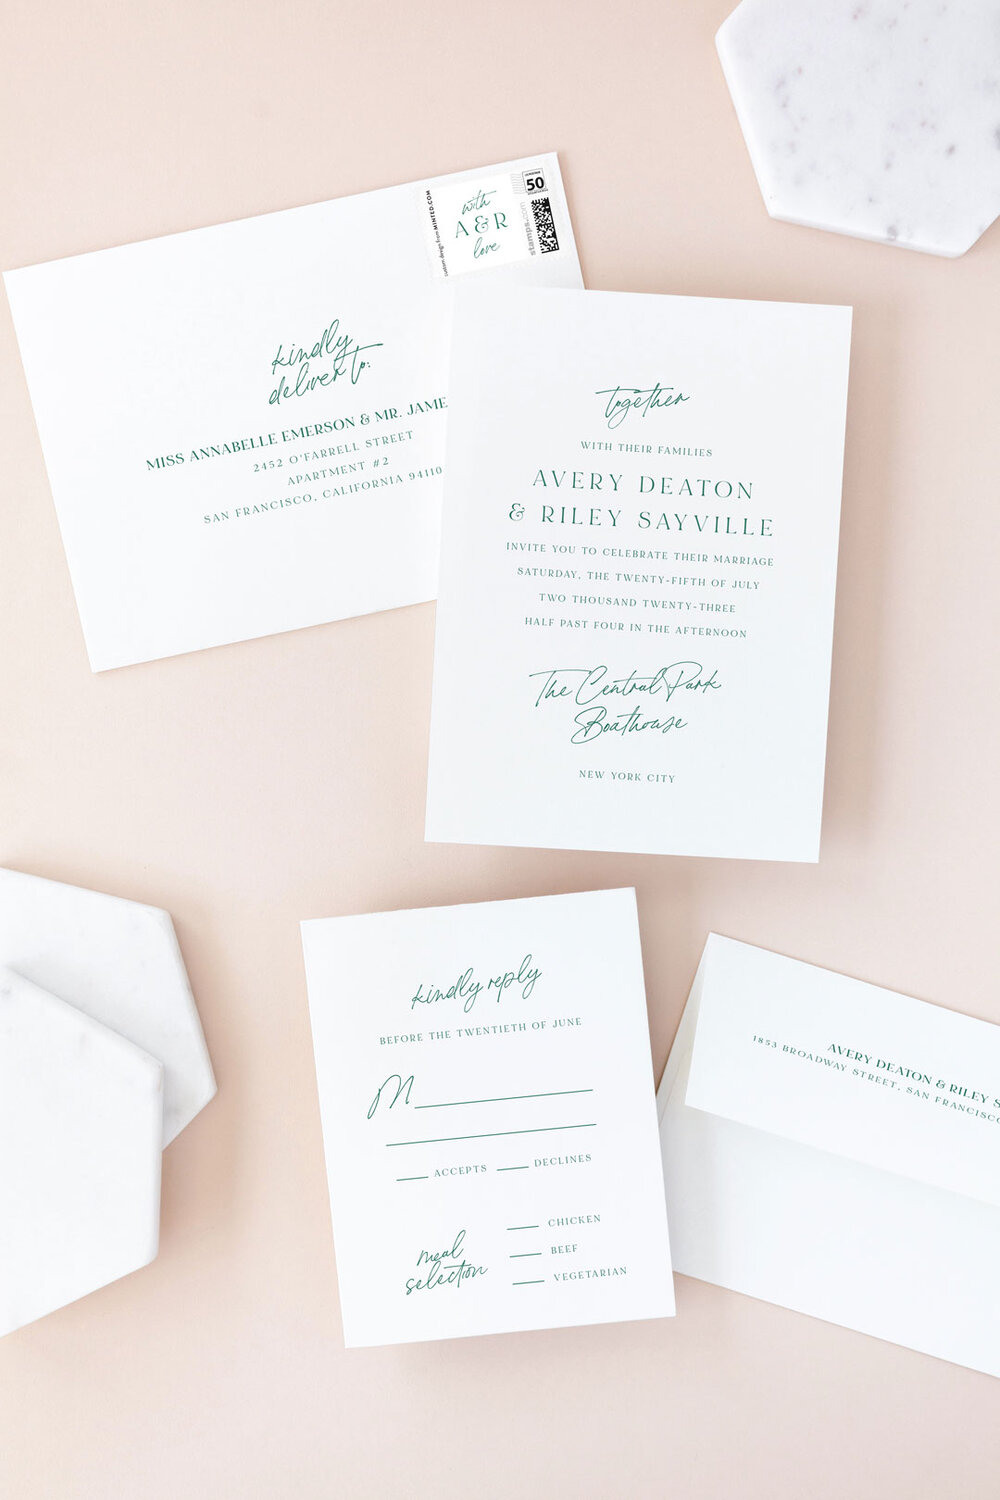 Minted Composure Green and White Formal Wedding invitation by Jackie Mangiolino